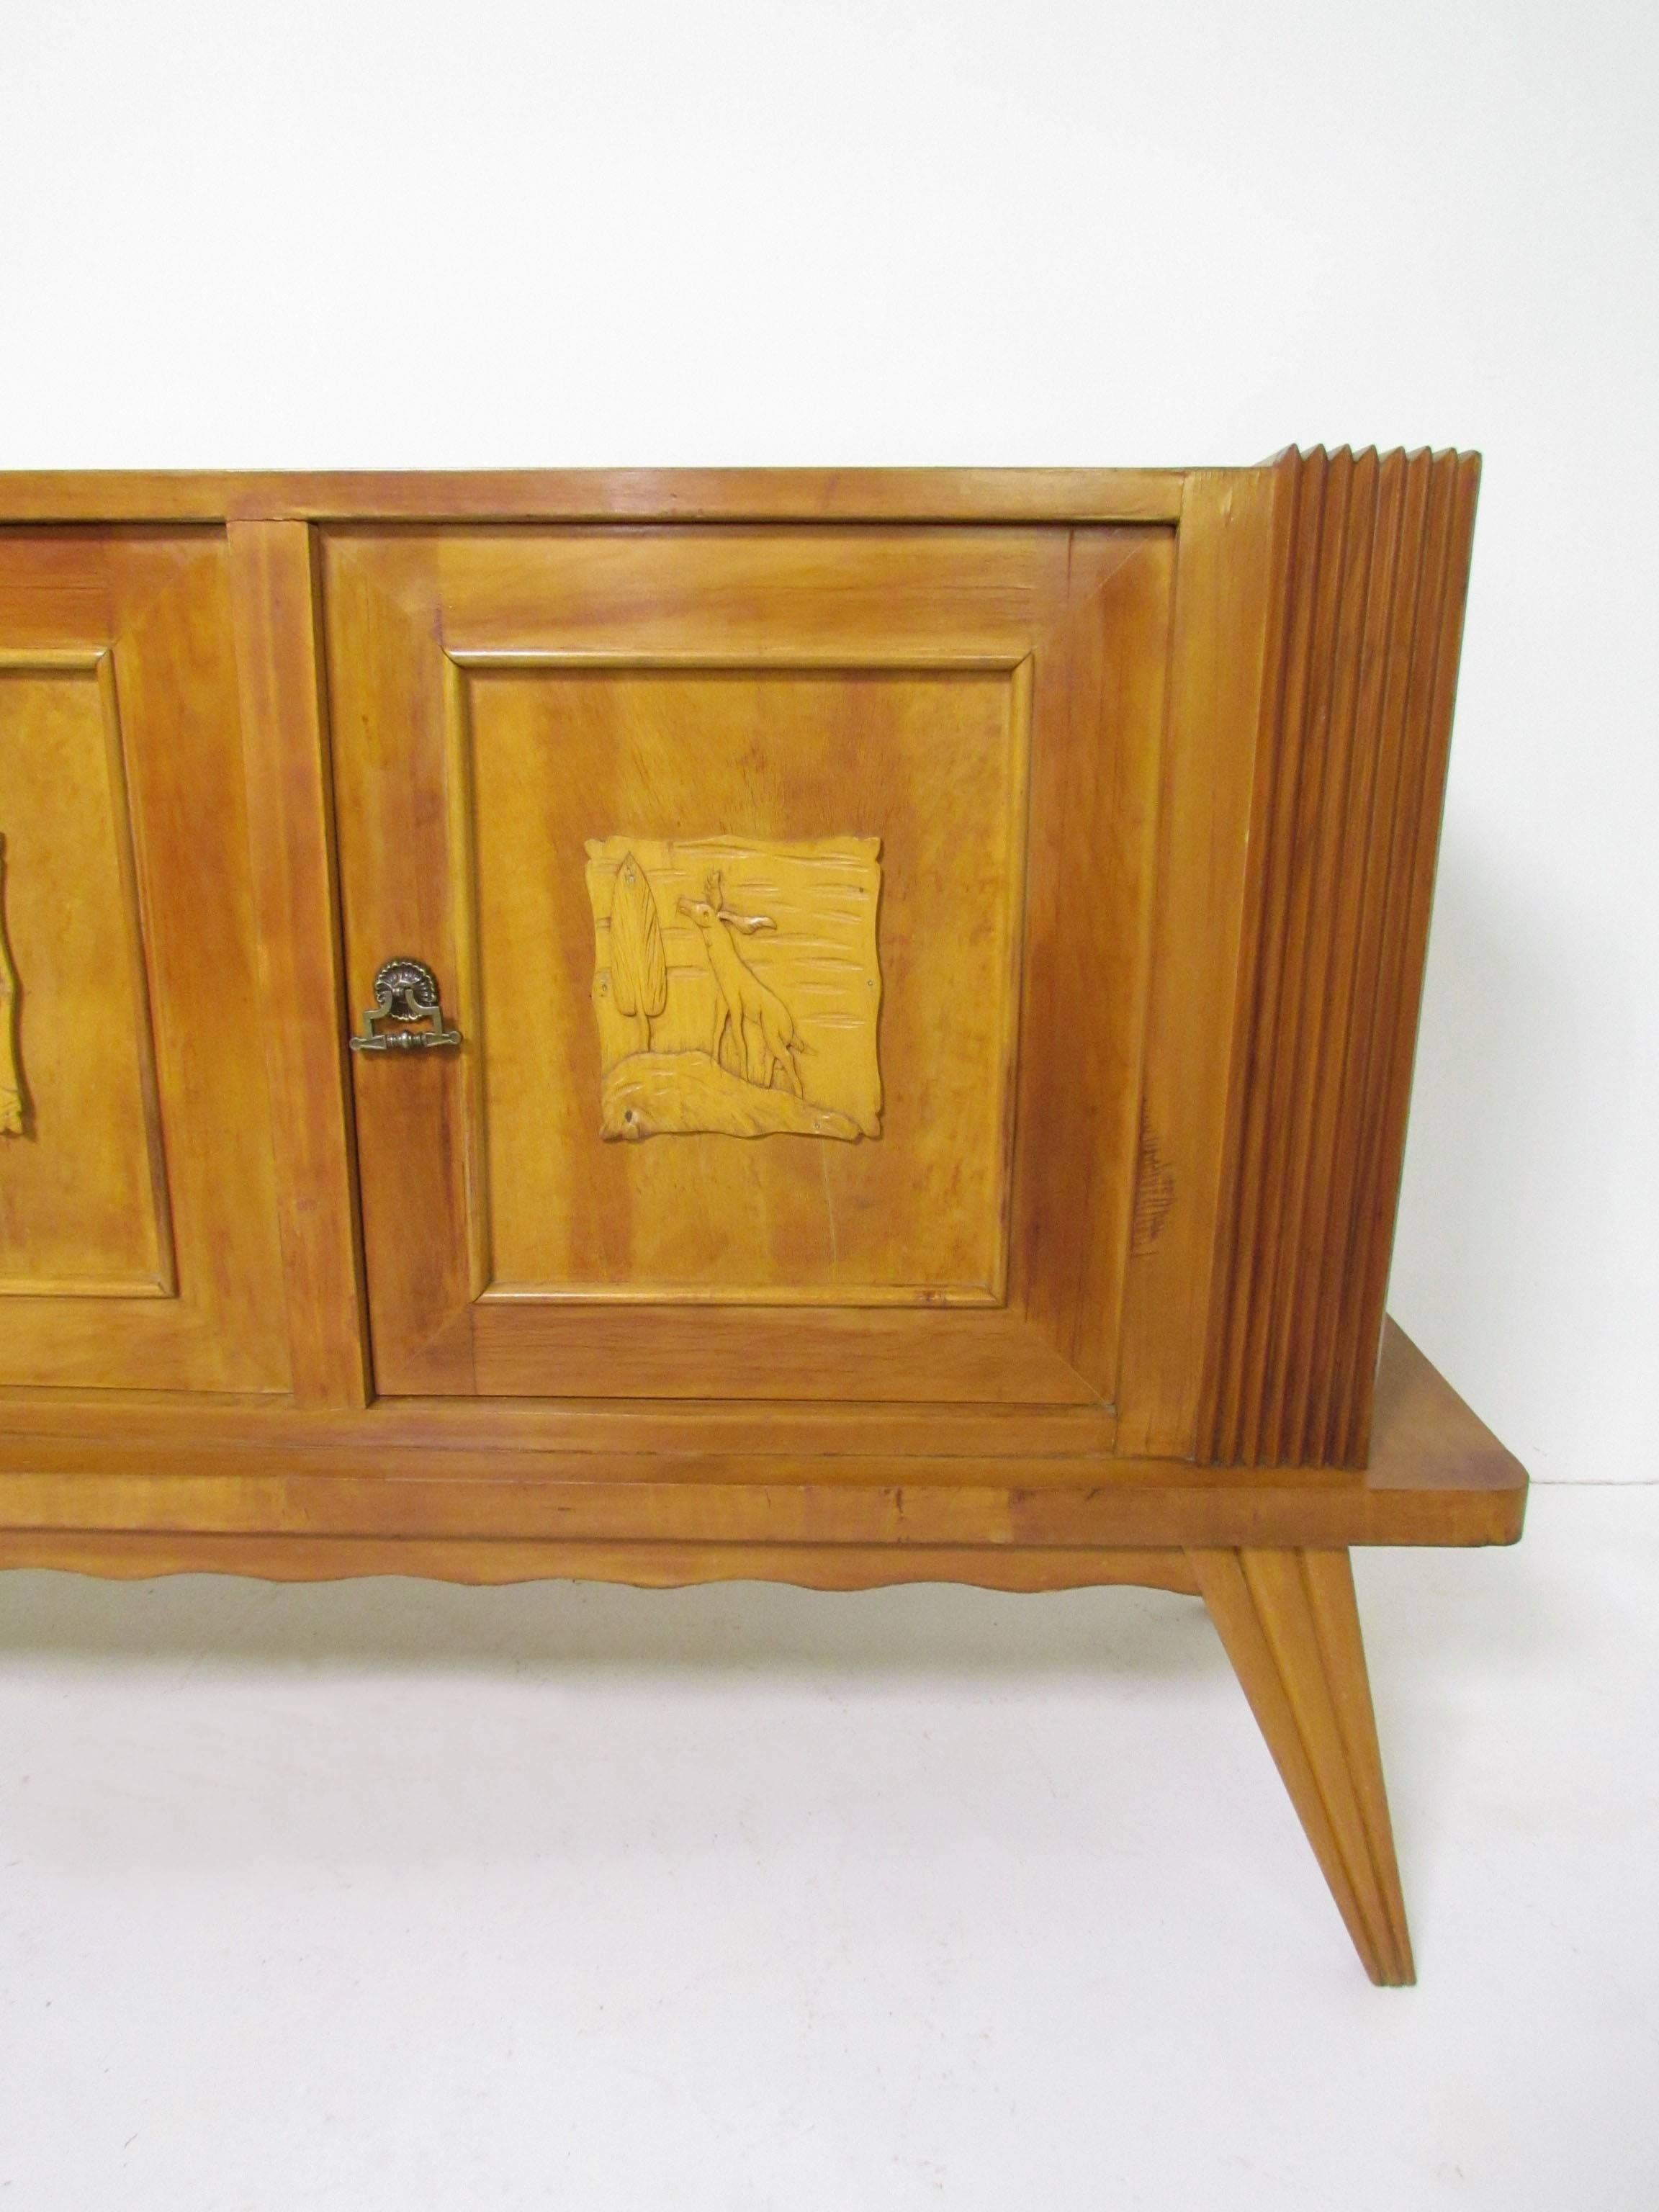 Unusual rustic sideboard, made in Italy, circa late 1940s-early 1950s. Hand-carved decorative panels on the door fronts, brass hardware, This wonderful hand built cabinet highlights its post war design with flared legs and radiant end fins atop an